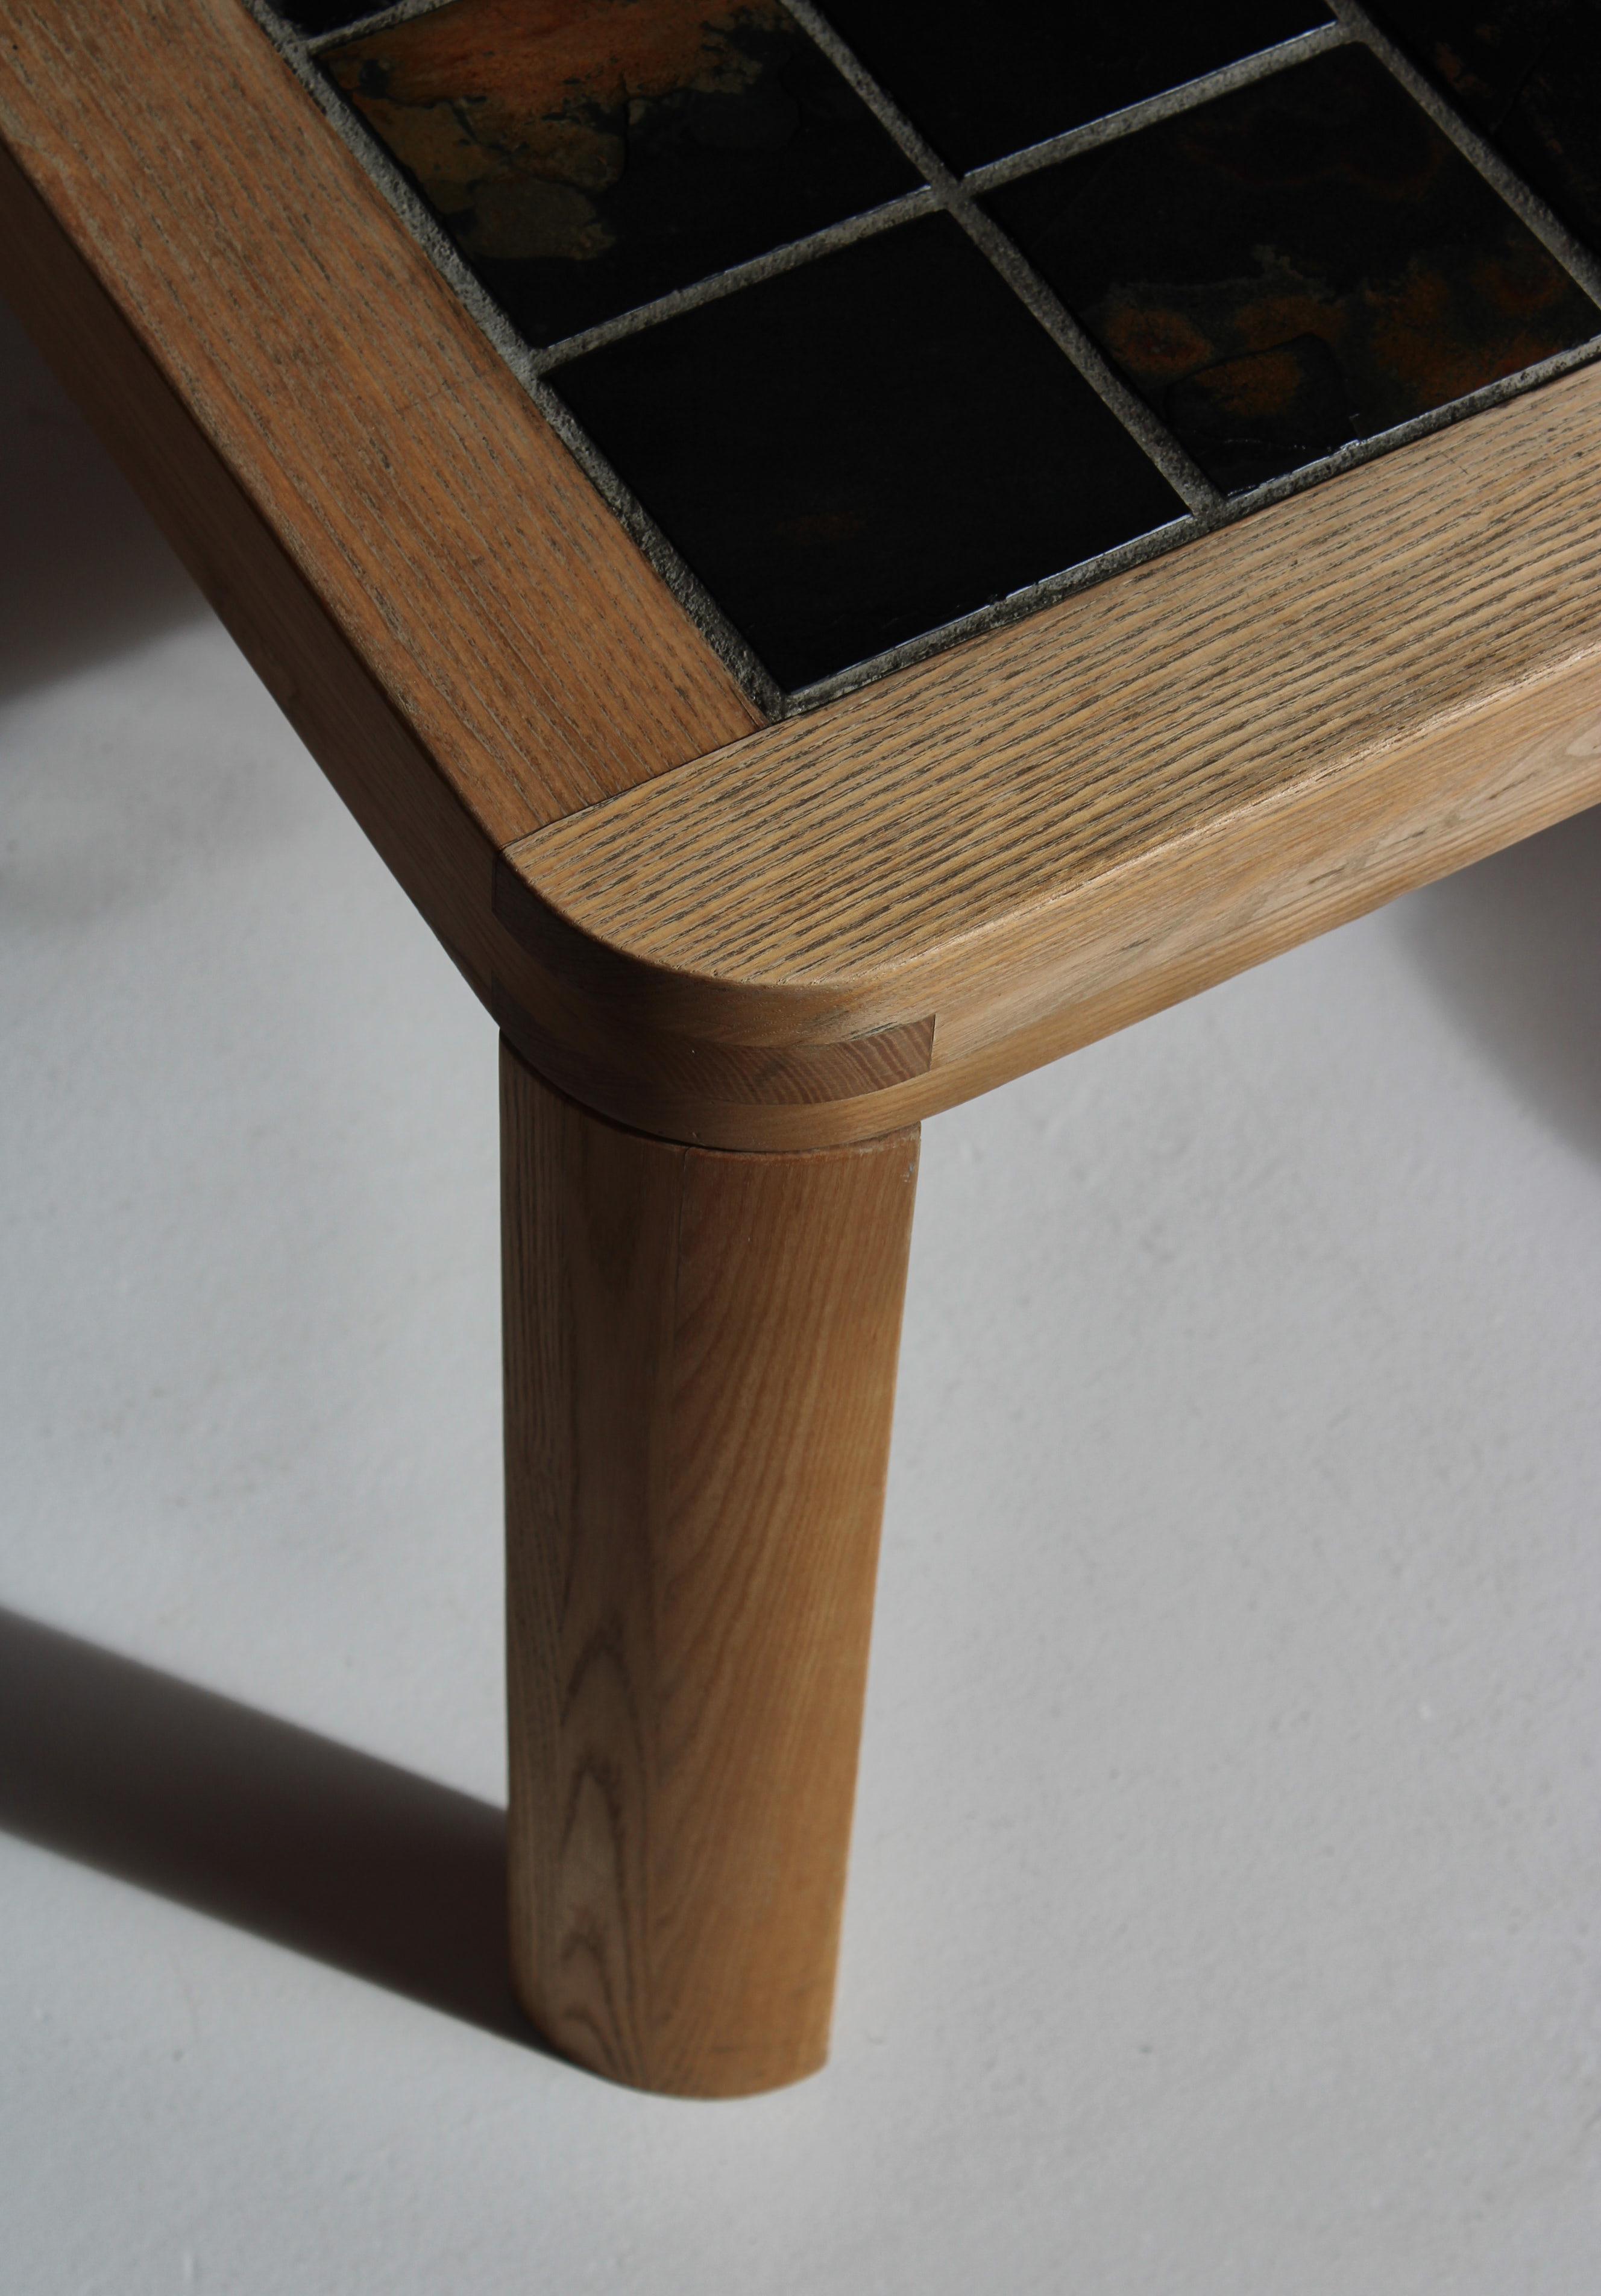 Square Coffee Table in Oak with Slate Top, Haslev Furniture, Denmark, 1970s For Sale 4